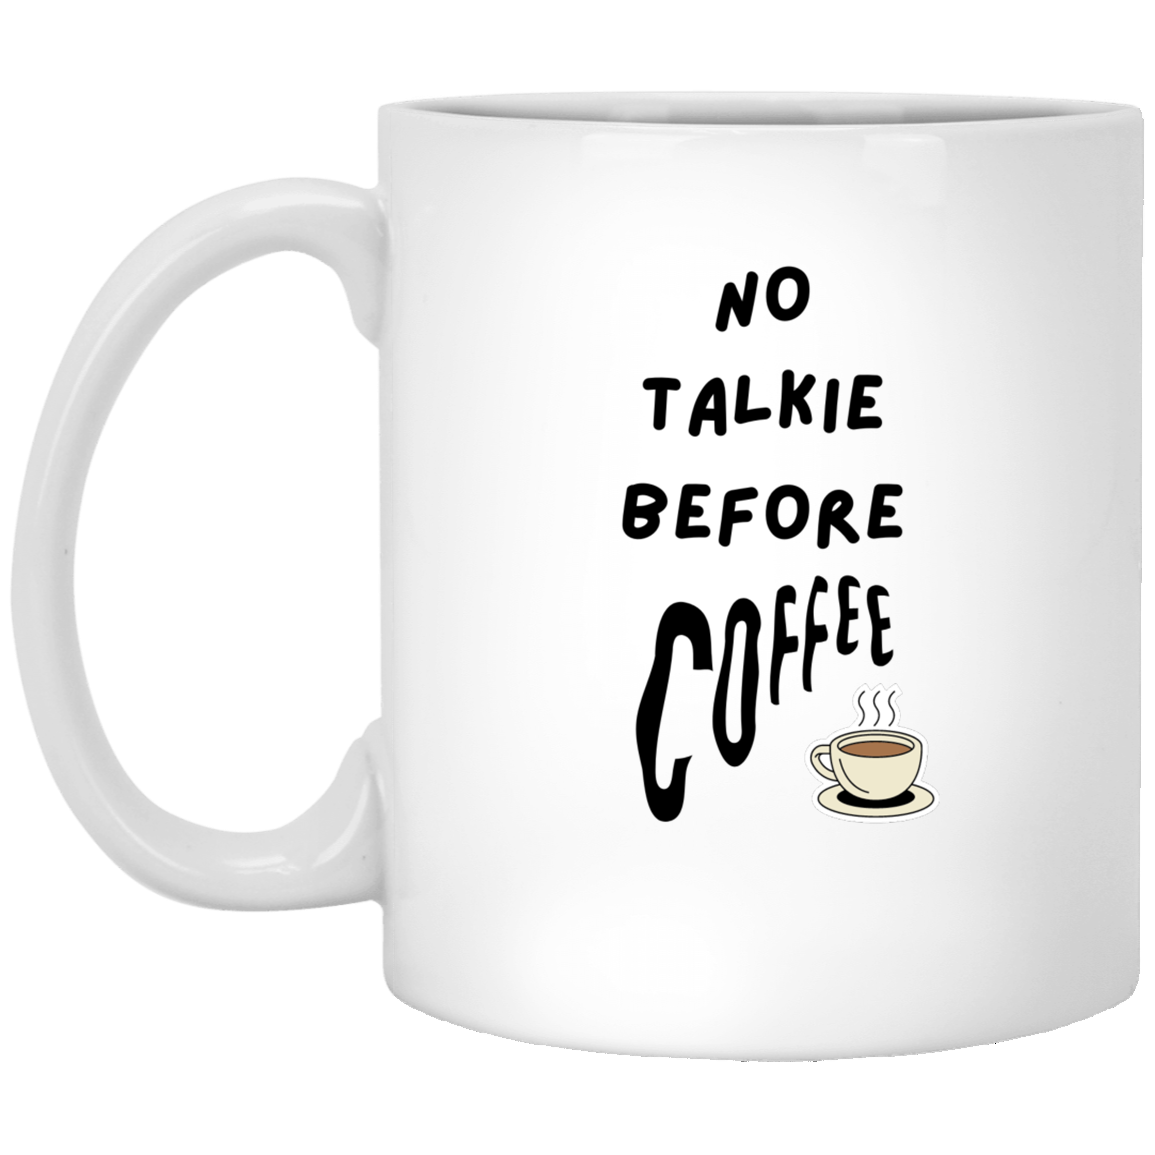 NO TALKIE BEFORE COFFEE